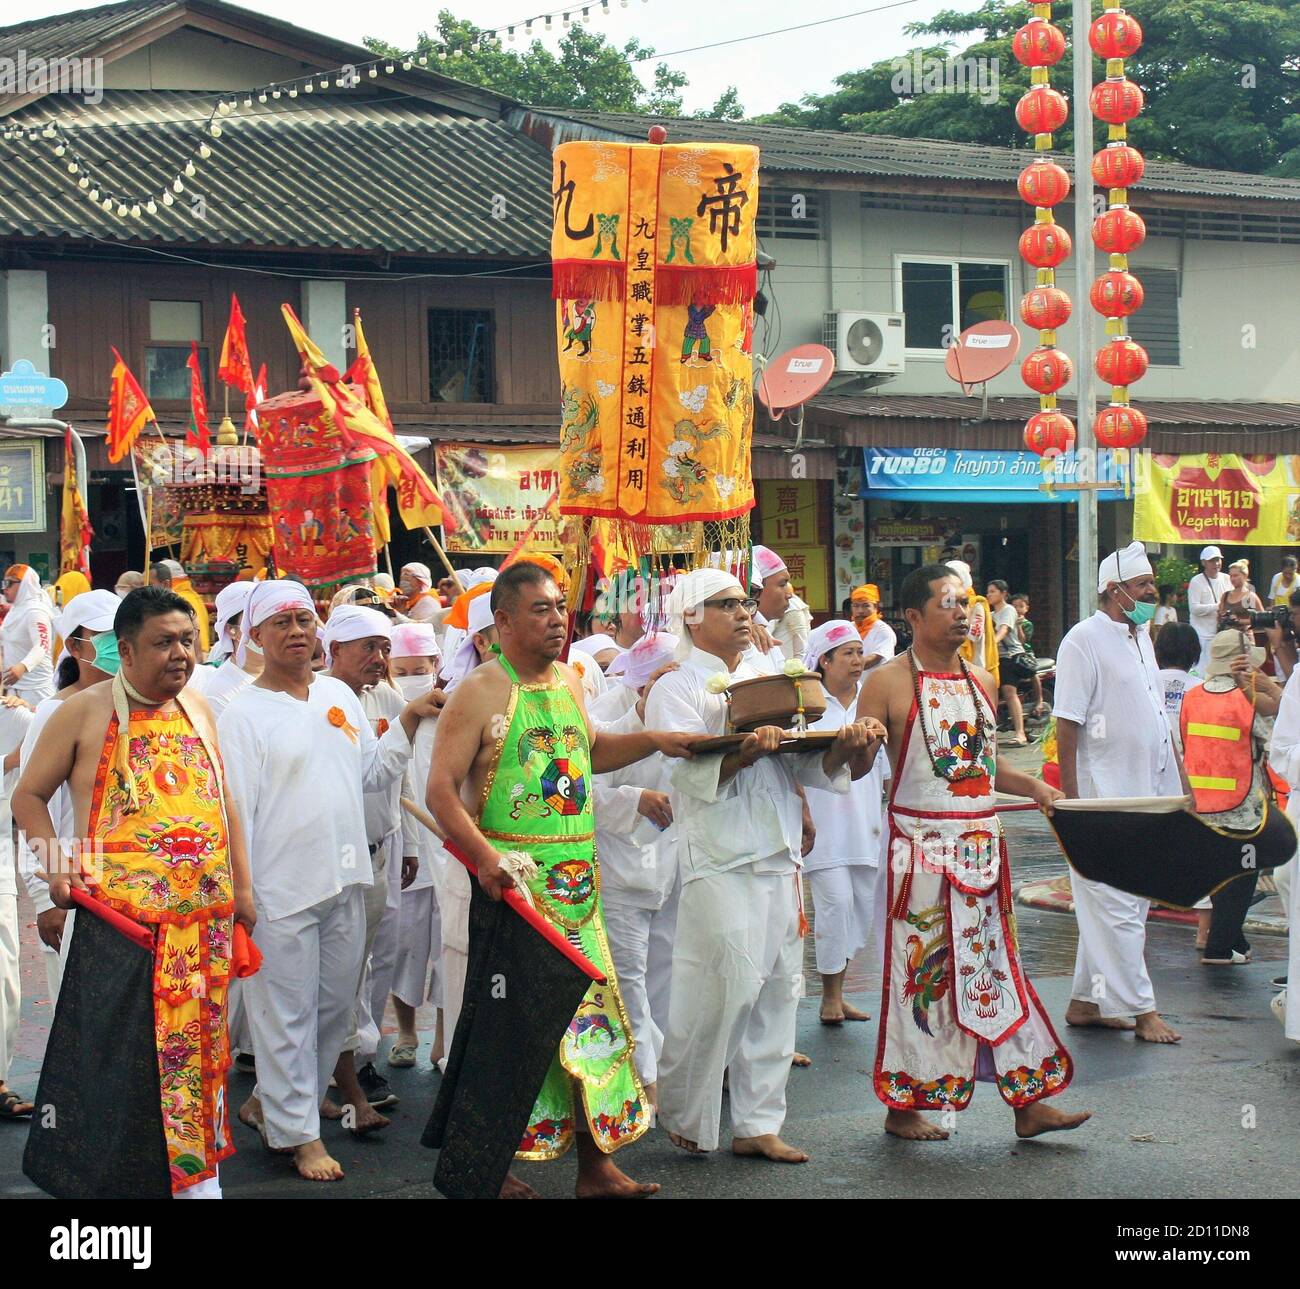 Phuket Town / Thailand - October 7, 2019: Nine Emperor Gods Festival or Phuket Vegetarian Festival parade, procession with Taoist devotees in traditio Stock Photo